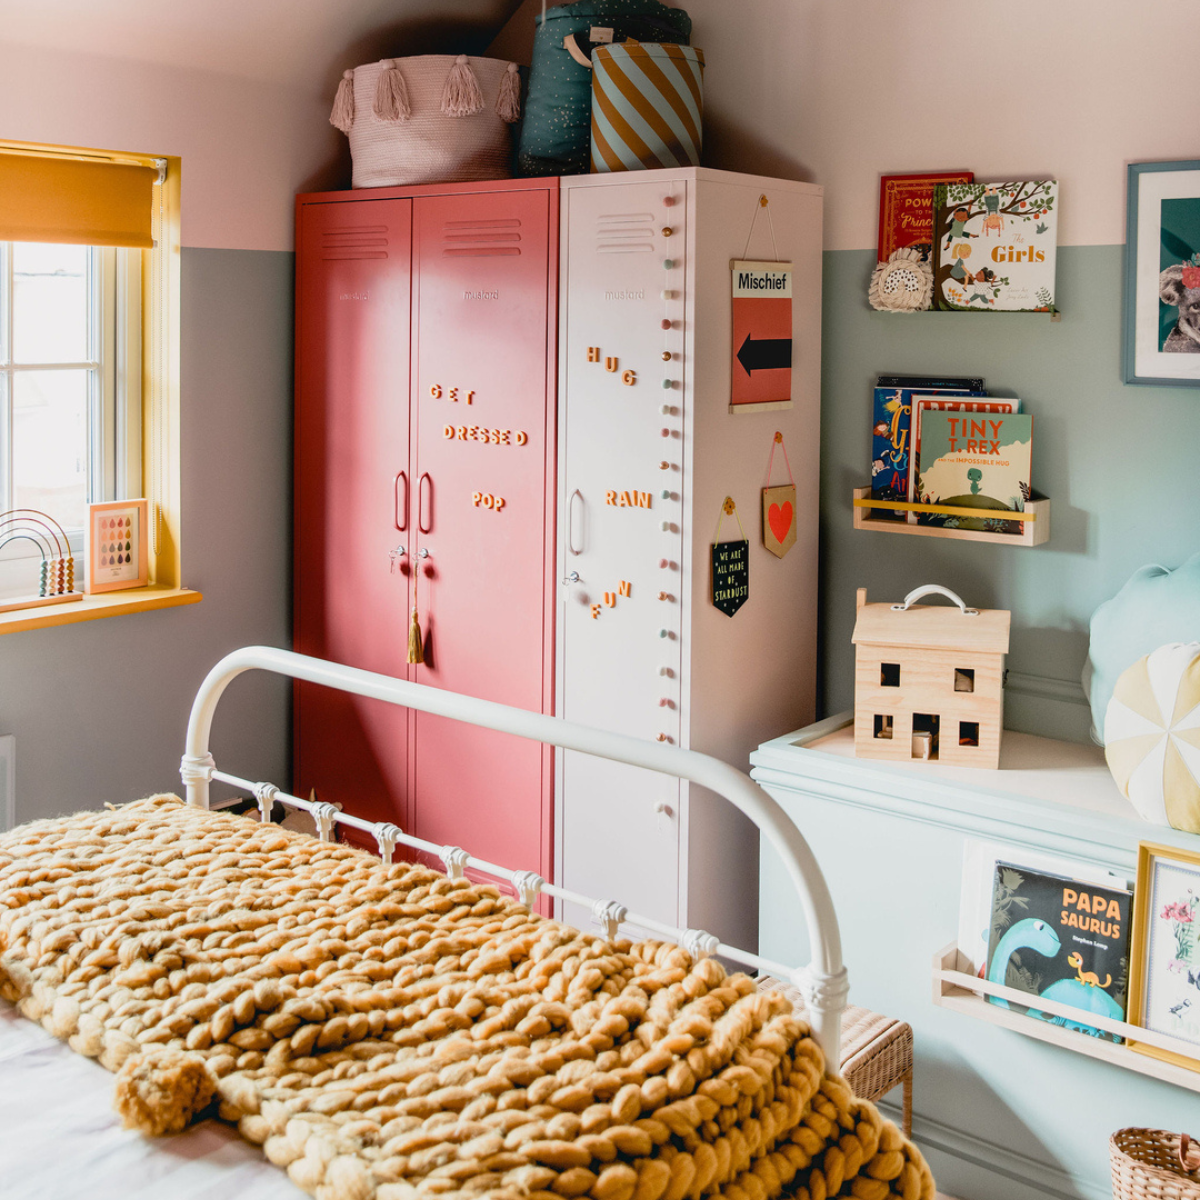 A Berry Twinny and a Blush Skinny sit side-by-side at the foot of a bed. Wordbits magnets spell out 'get dressed' on the front and colourful baskets sit on top.